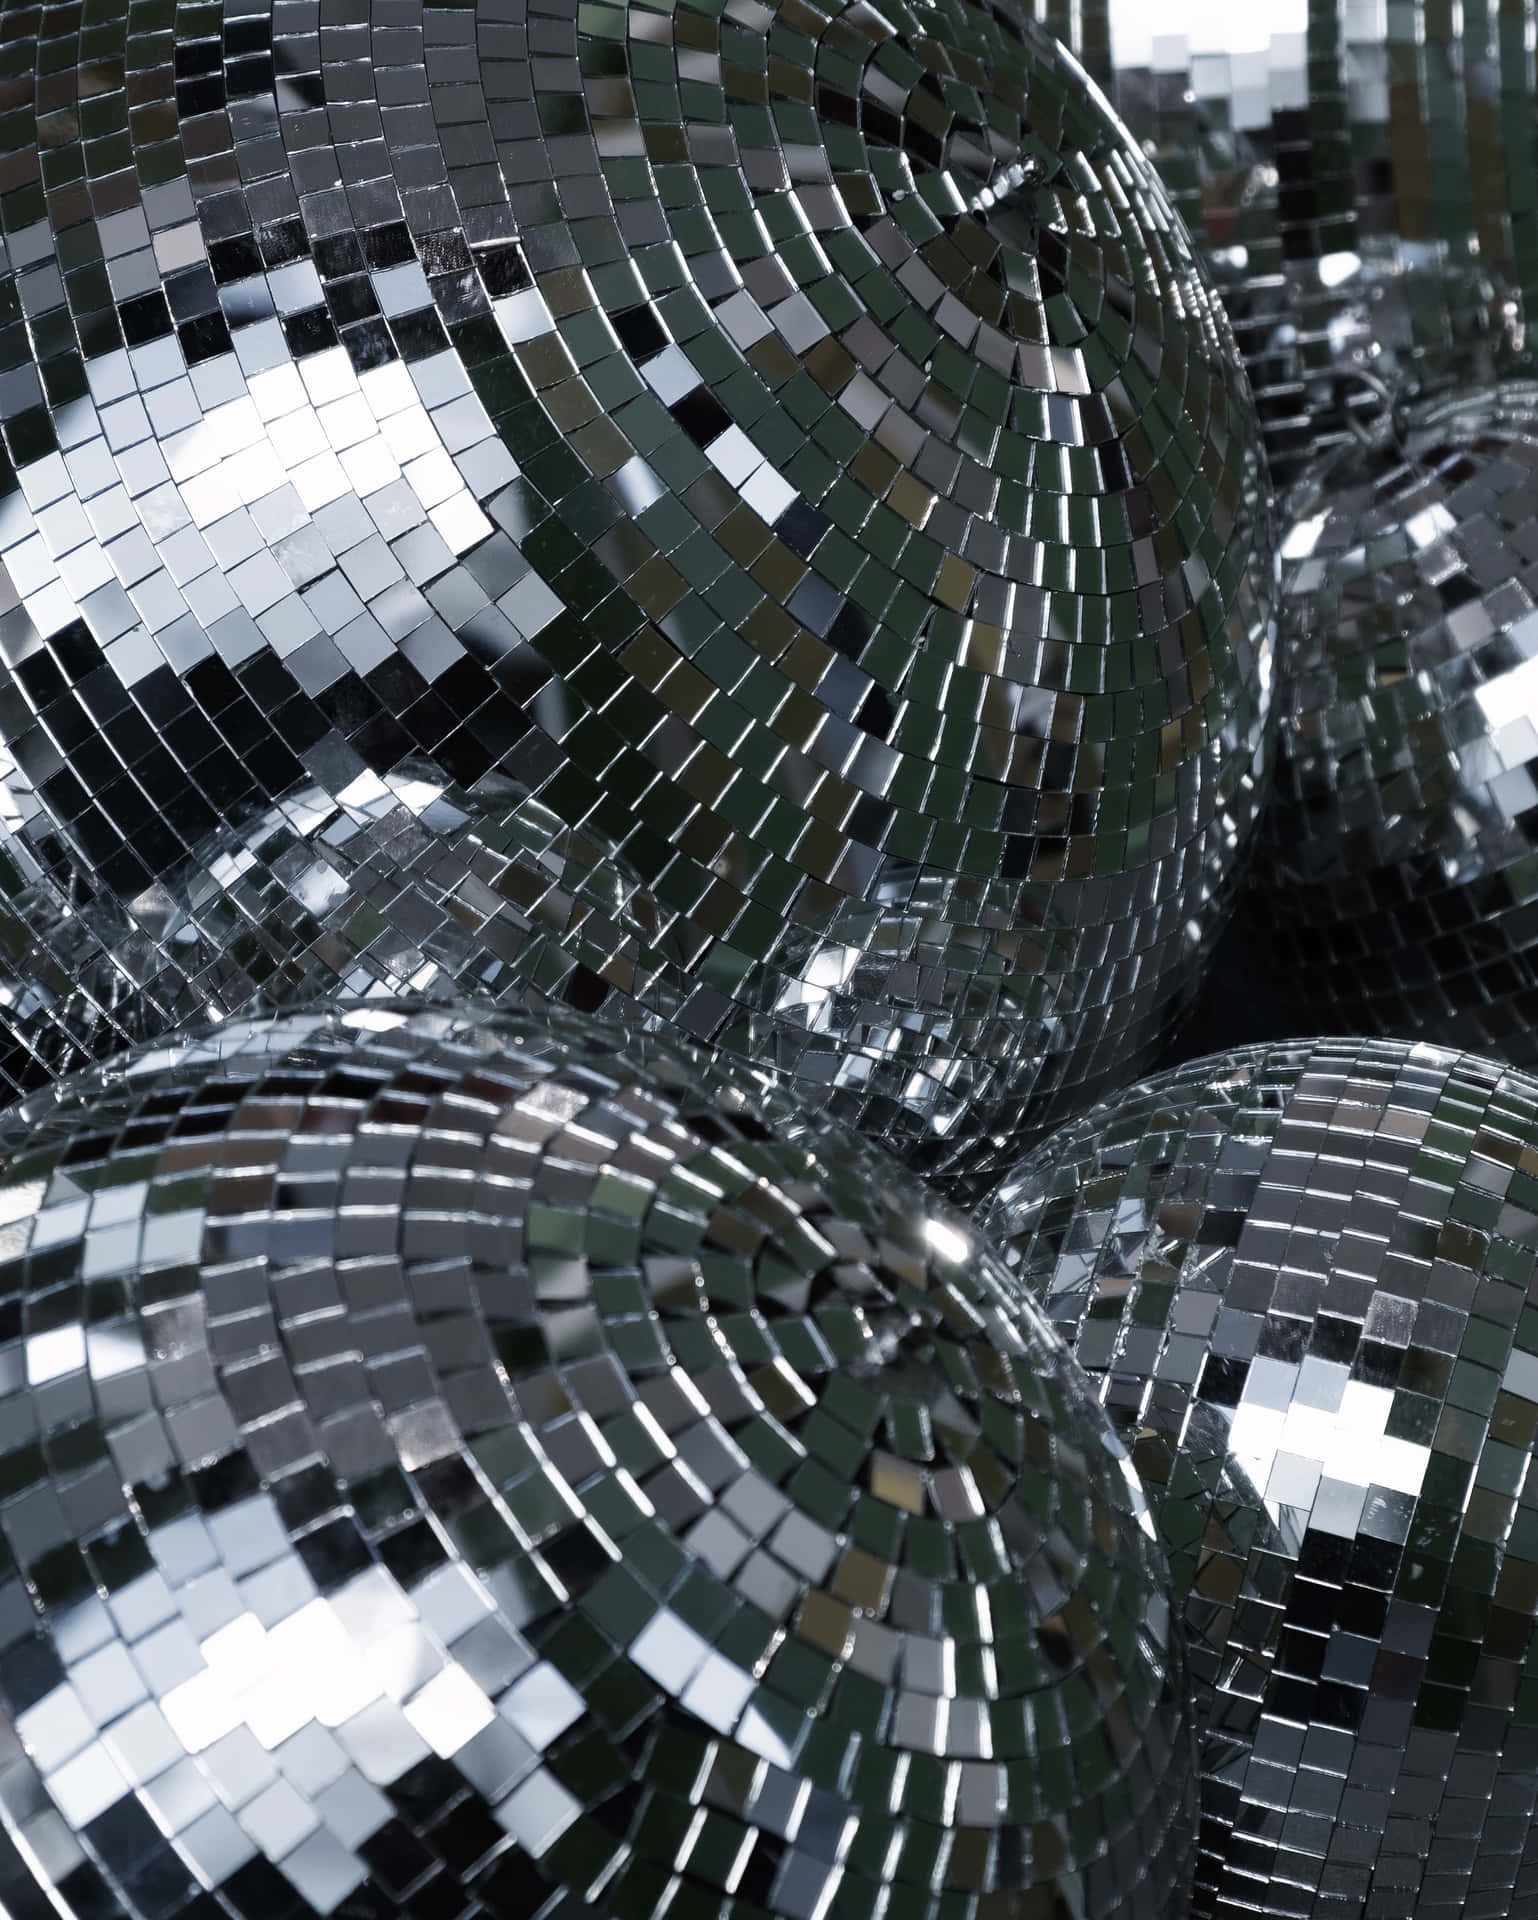 Dance the night away with a mesmerizing disco ball